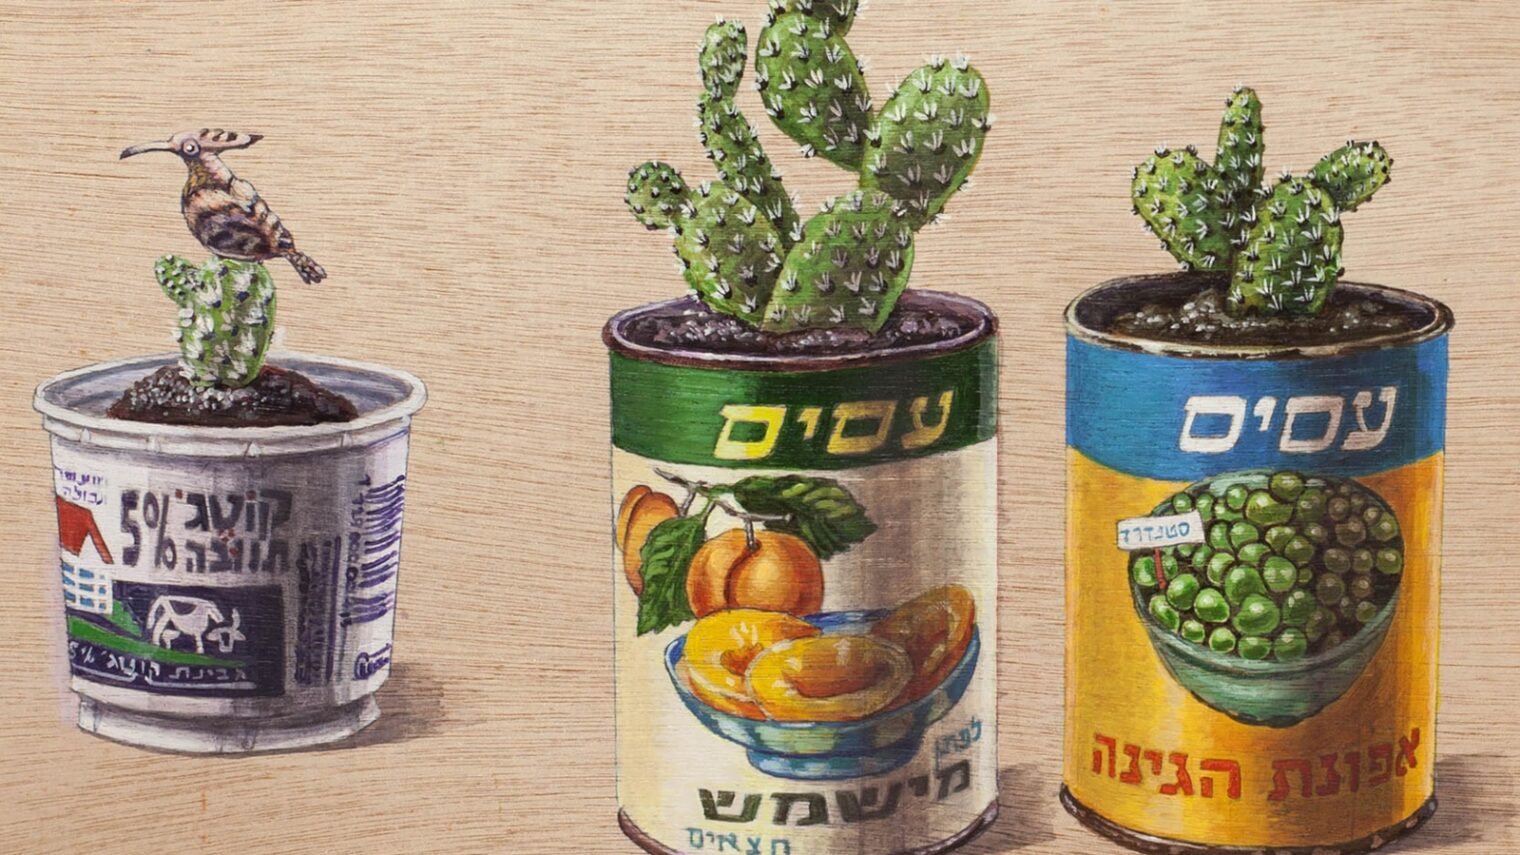 Rusted cans and cottage cheese containers repurposed as cactus planters are among the images with personal symbolism for painter Yoel Gilinsky that also resonate with Israeli "sabras" who grew up in 1950s and ’60s. Image: courtesy